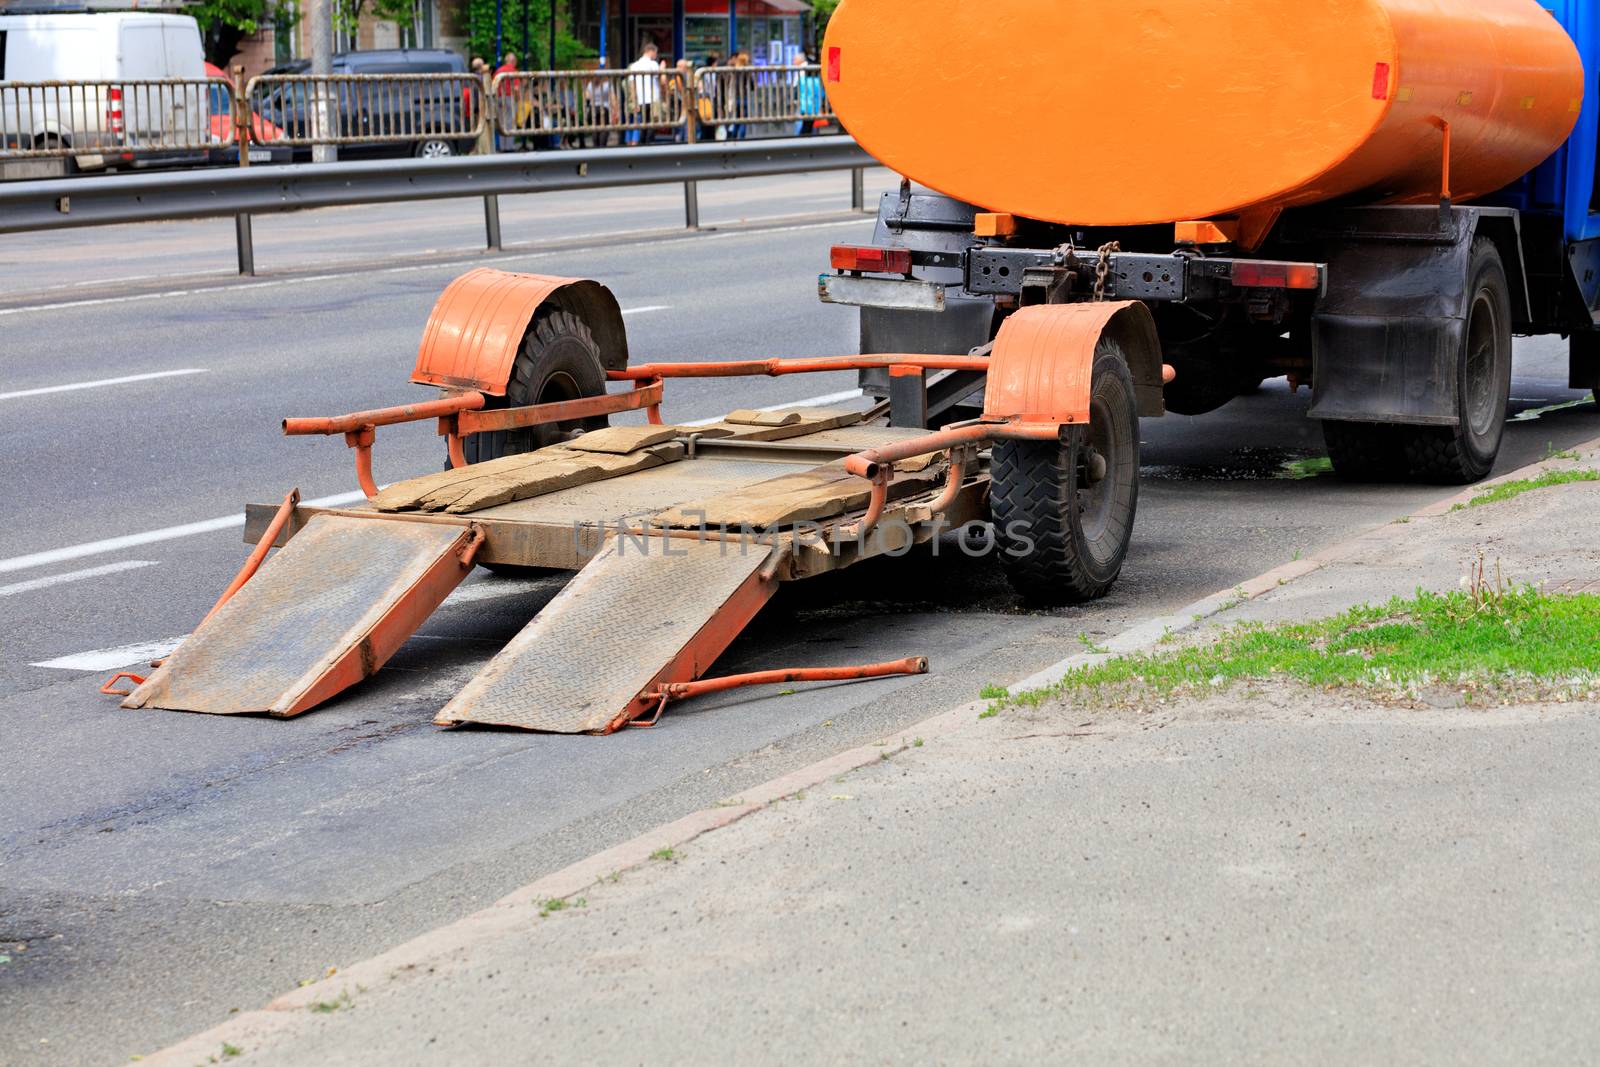 An old trailer with a low platform for transporting road equipment is attached to the rear bumper of an old water carrier truck, image with copy space.